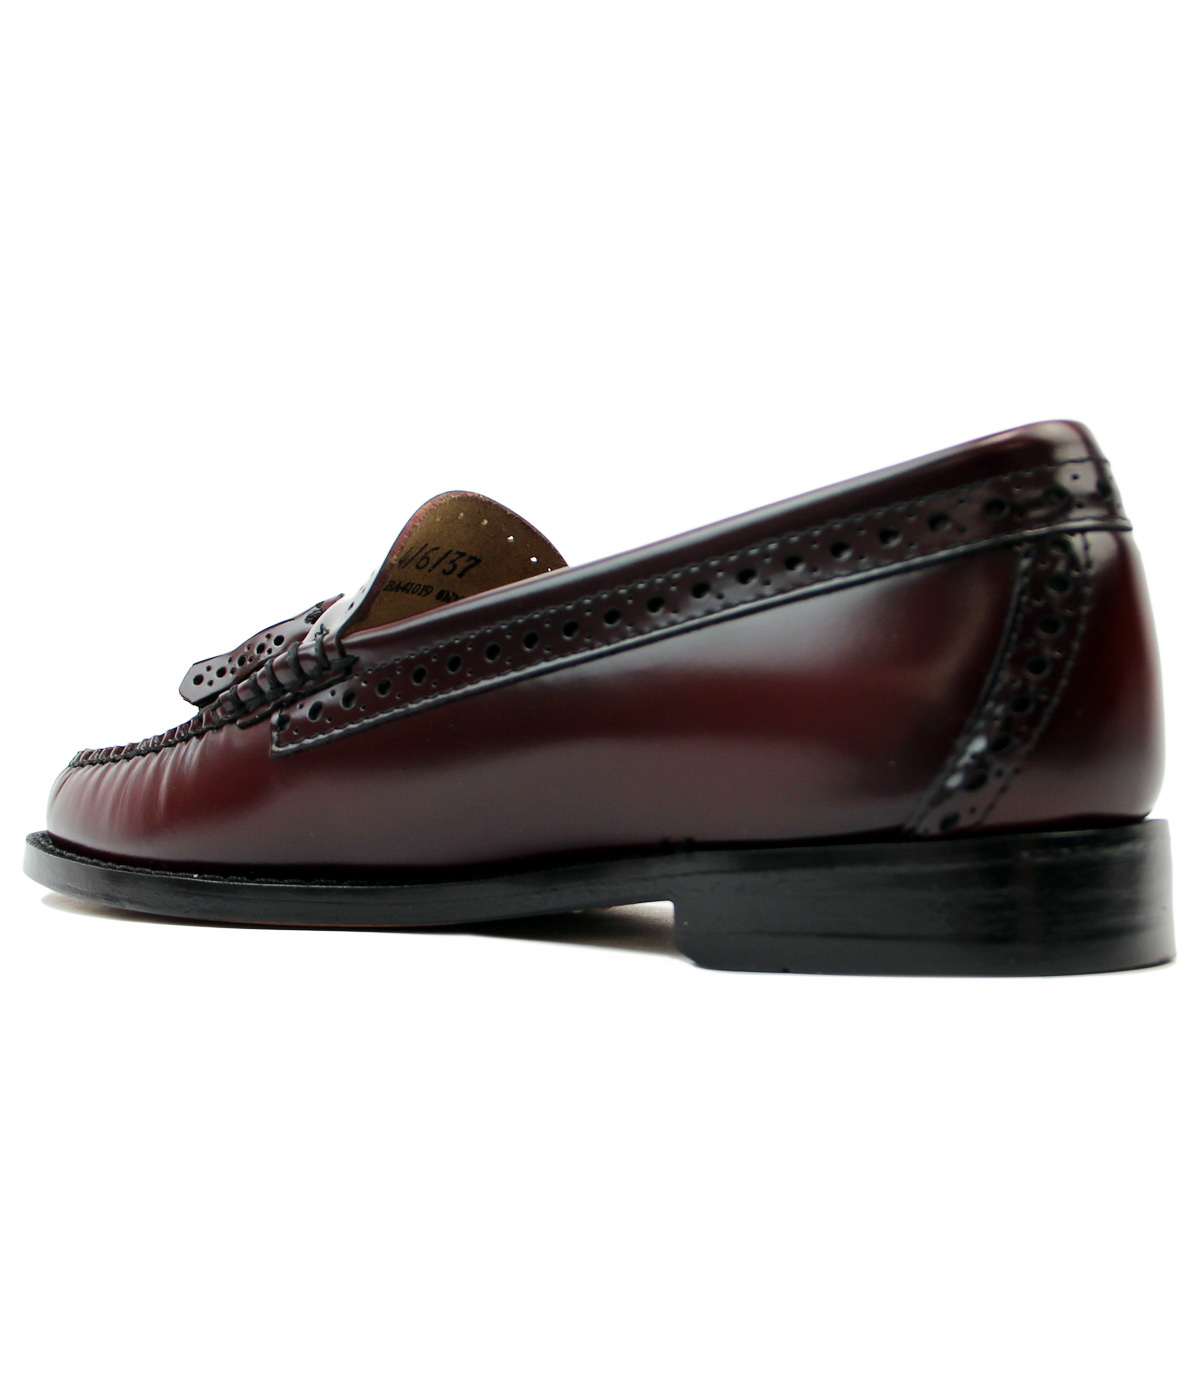 BASS WEEJUNS Estelle Retro Mod 60s Brogue Loafers in Wine